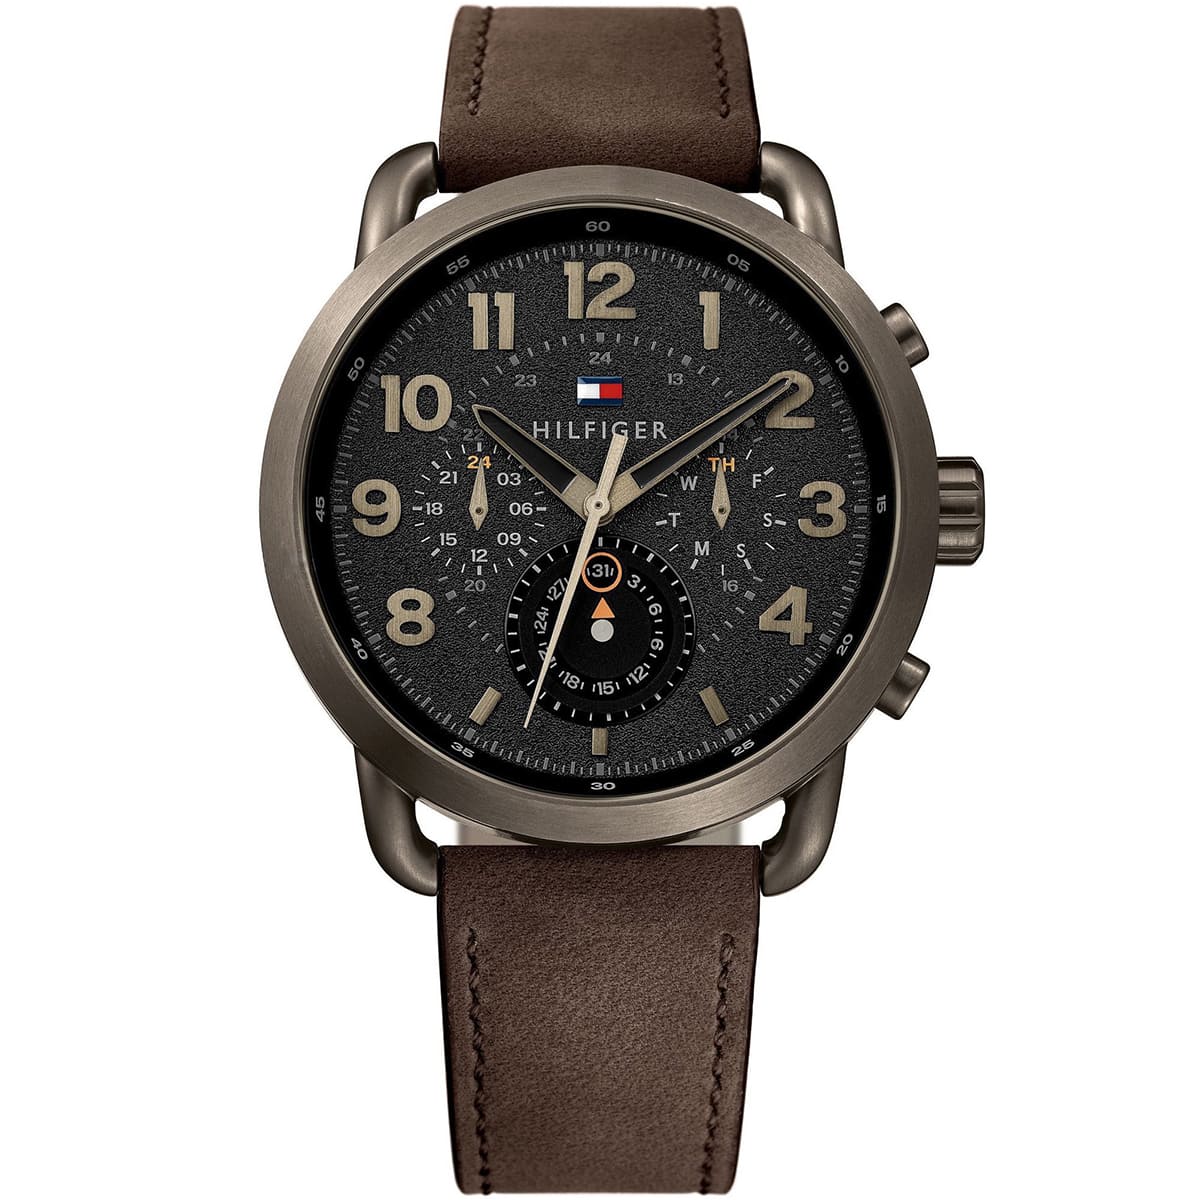 1791425-tommy-hilfiger-watch-men-black-dial-leather-brown-strap-quartz-battery-analog-monthly-weekly-date-briggs